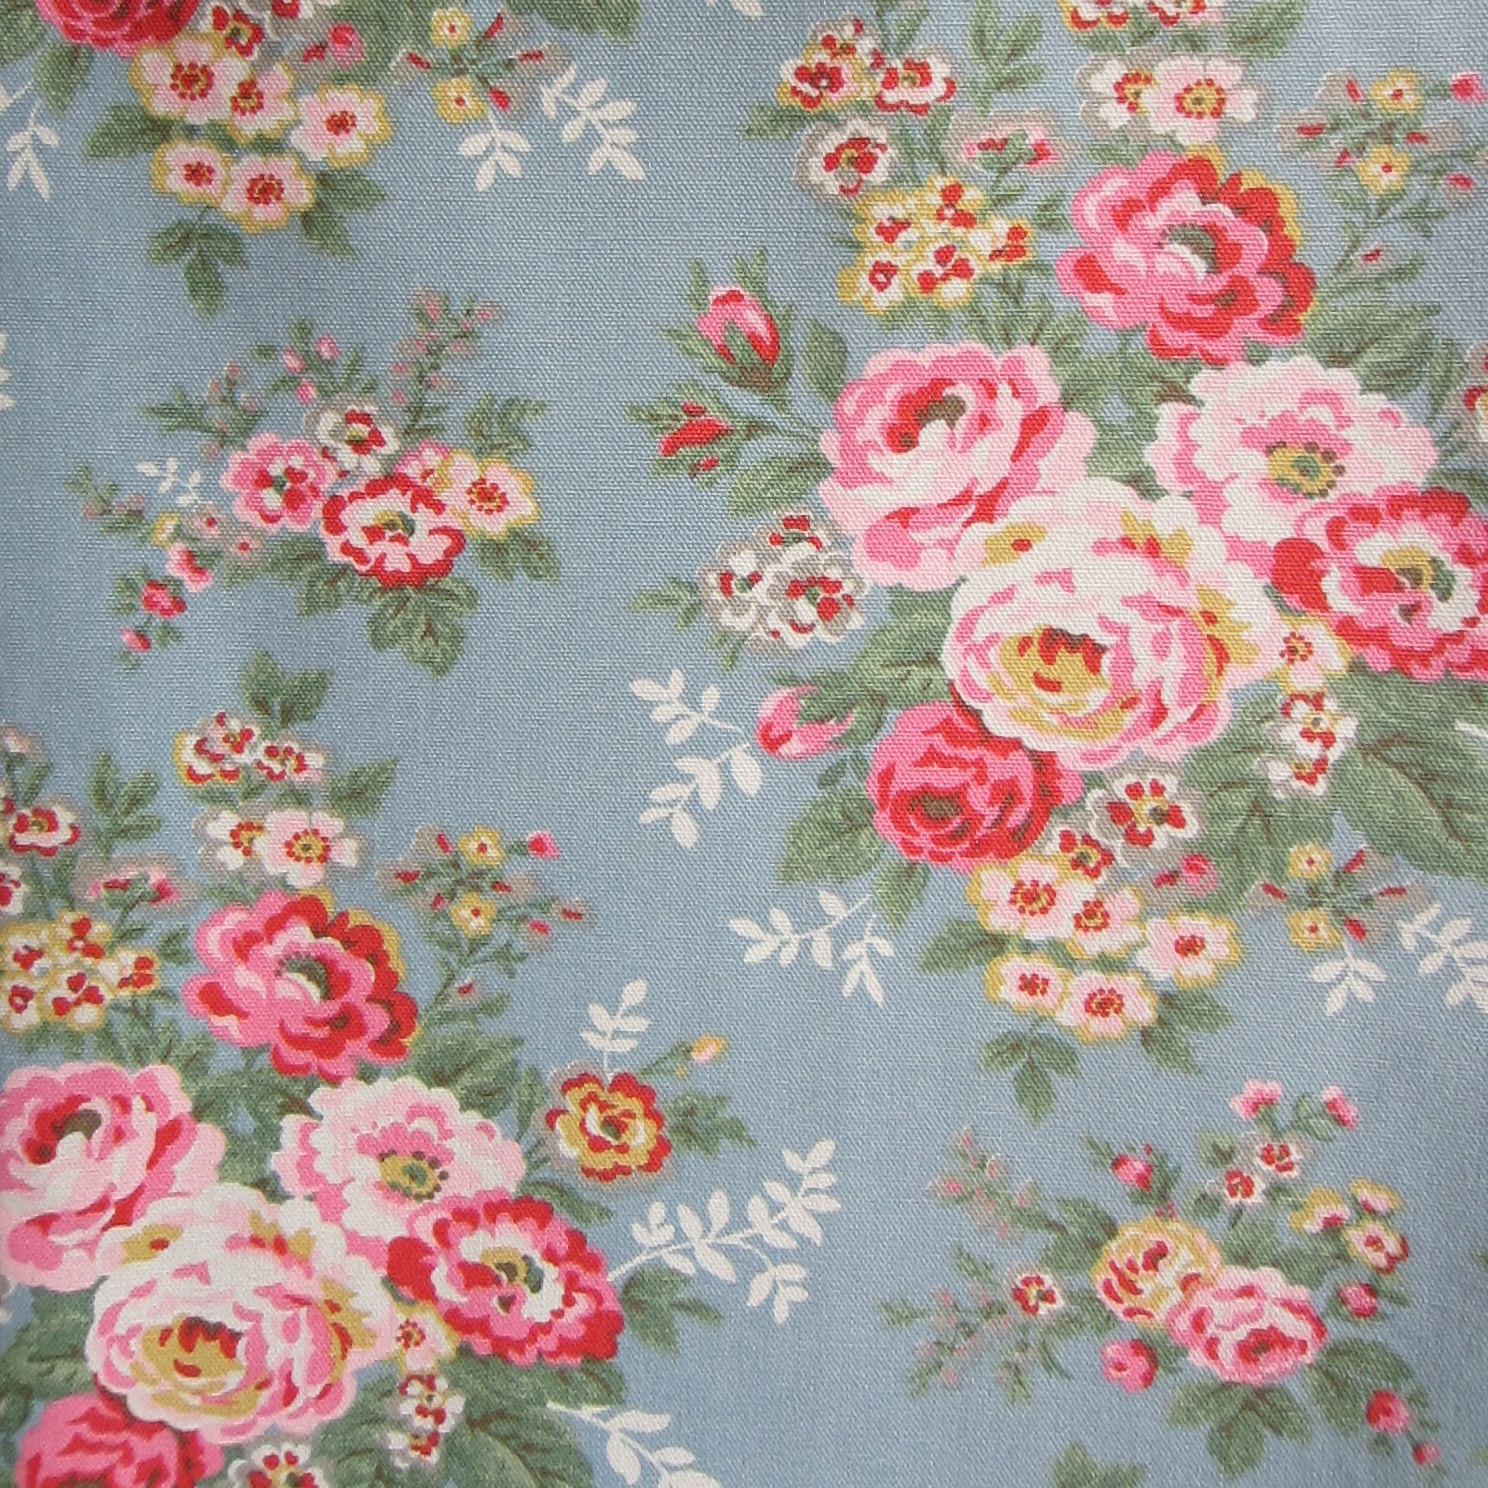 Vintage Rose Print Background This Is A Heavy Cotton Printed